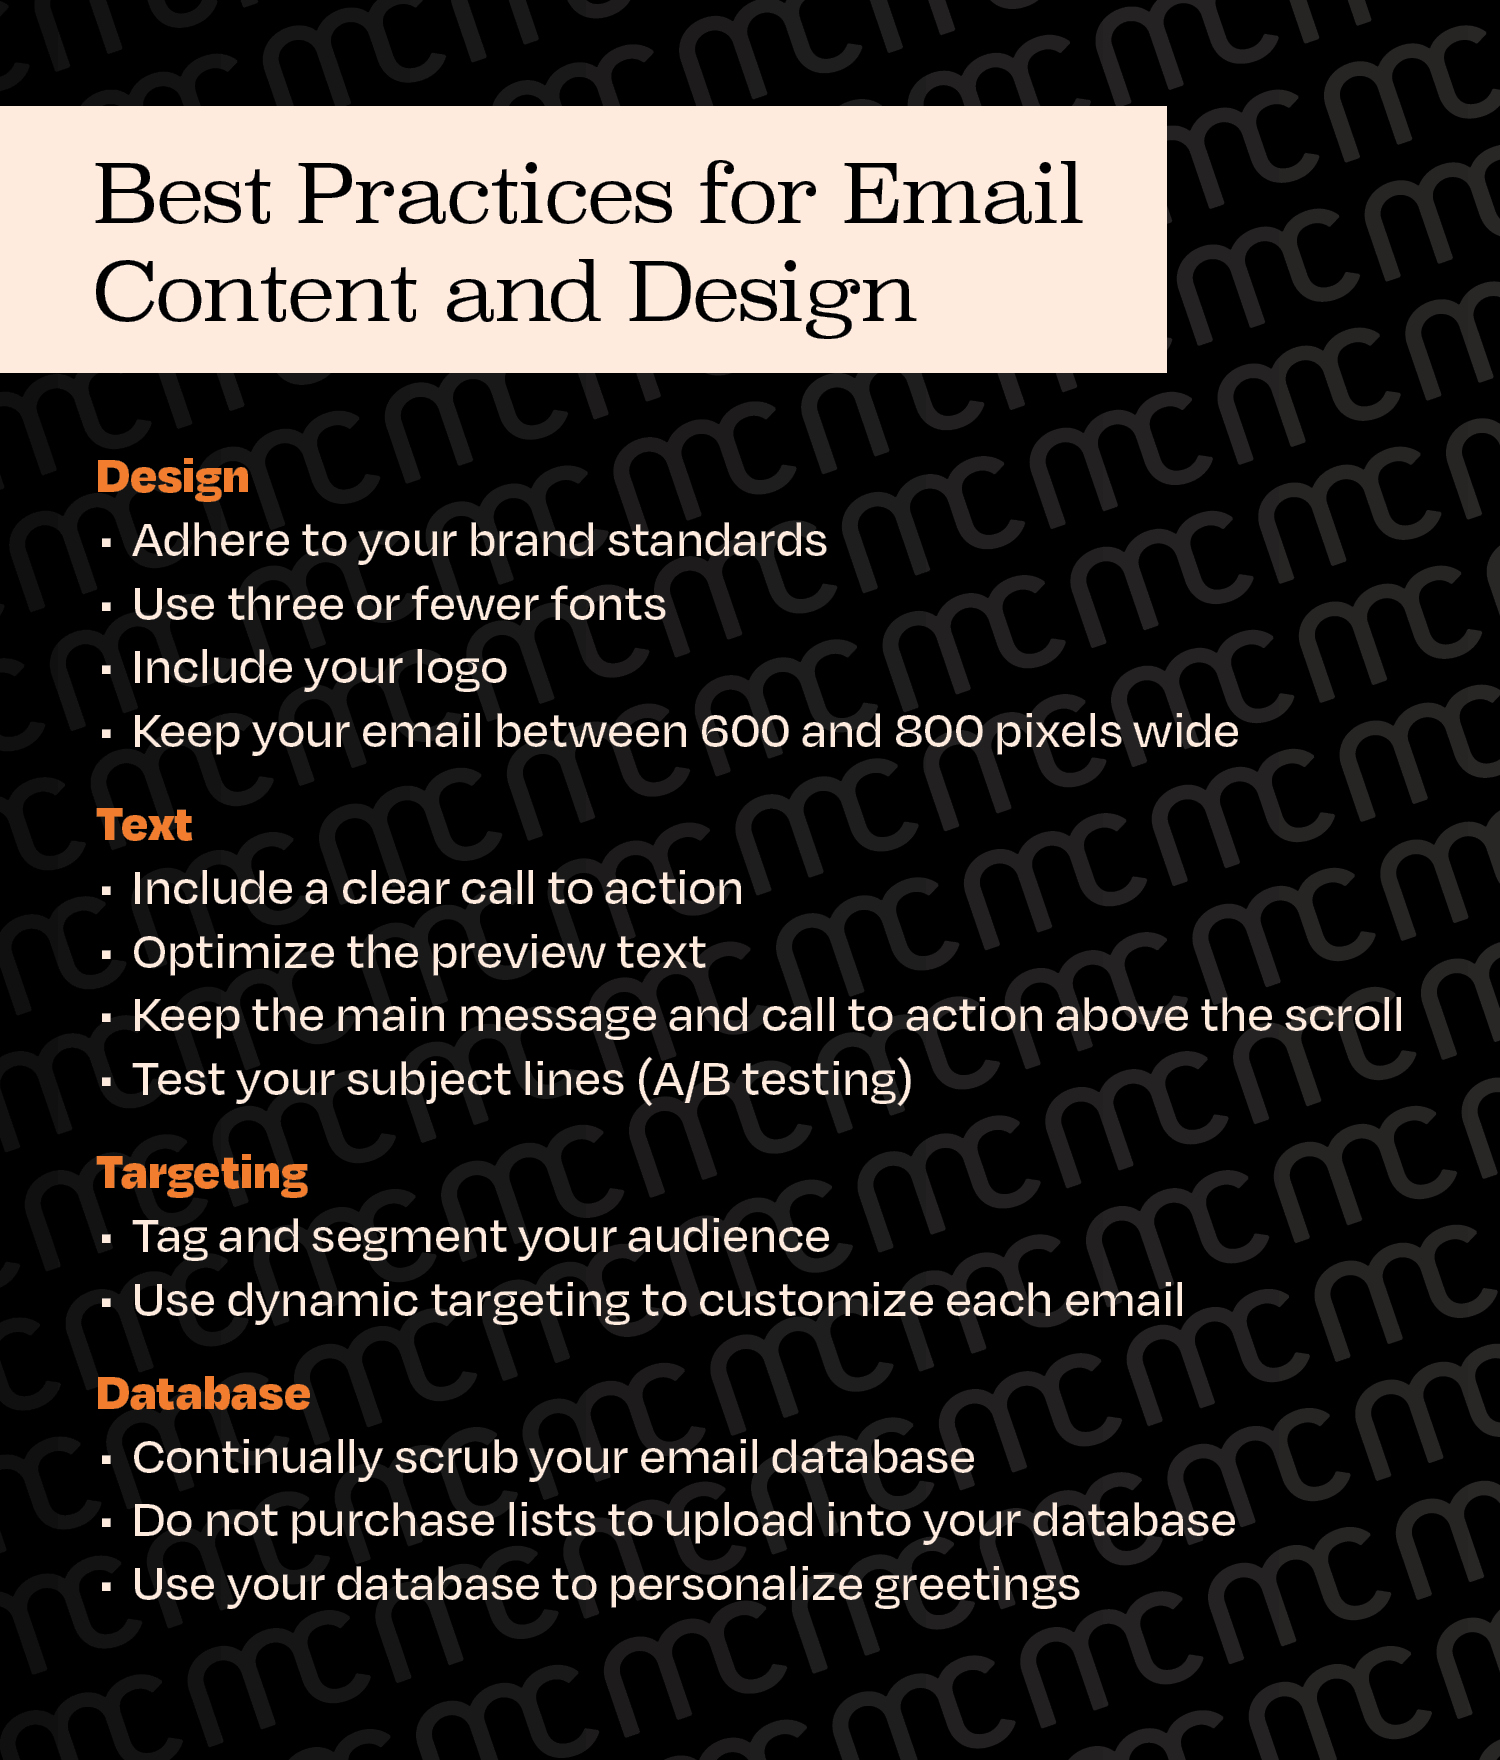 Best Practices for Email Content and Design